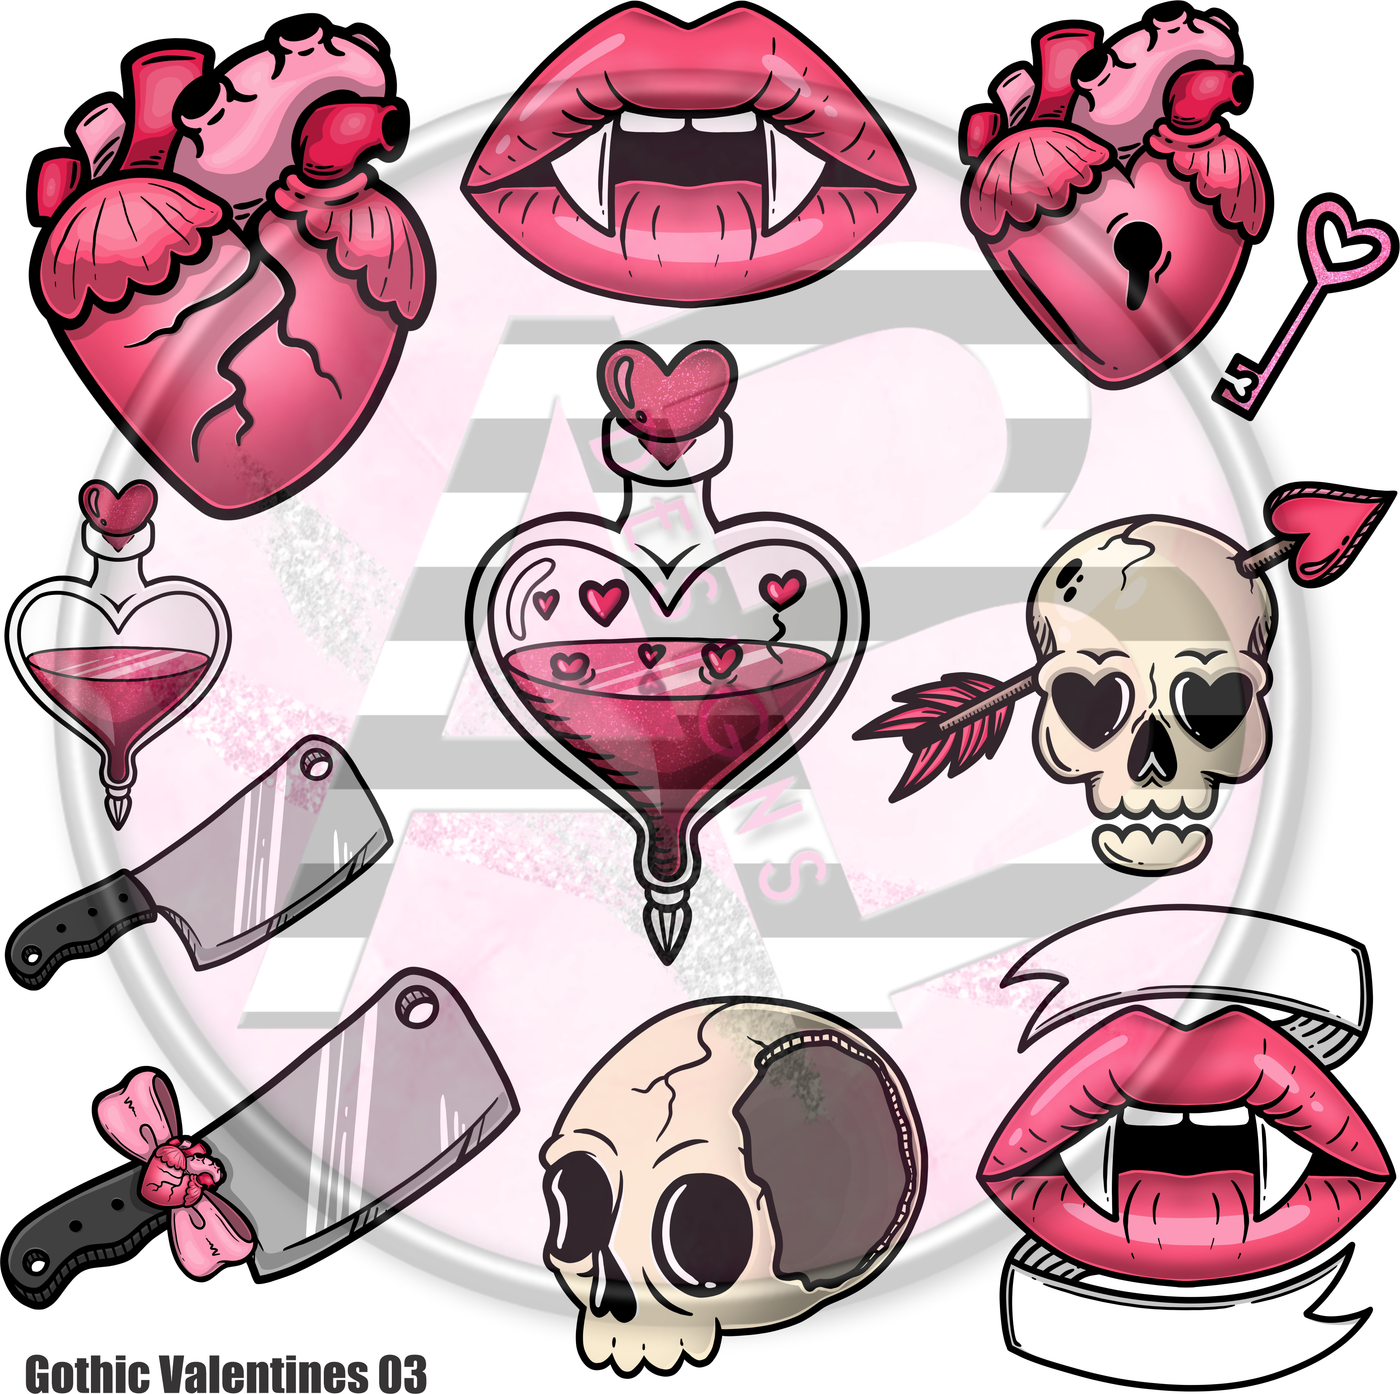 Adhesive Patterned Vinyl - Gothic Valentines 03 Full Sheet Clear 12 x 12